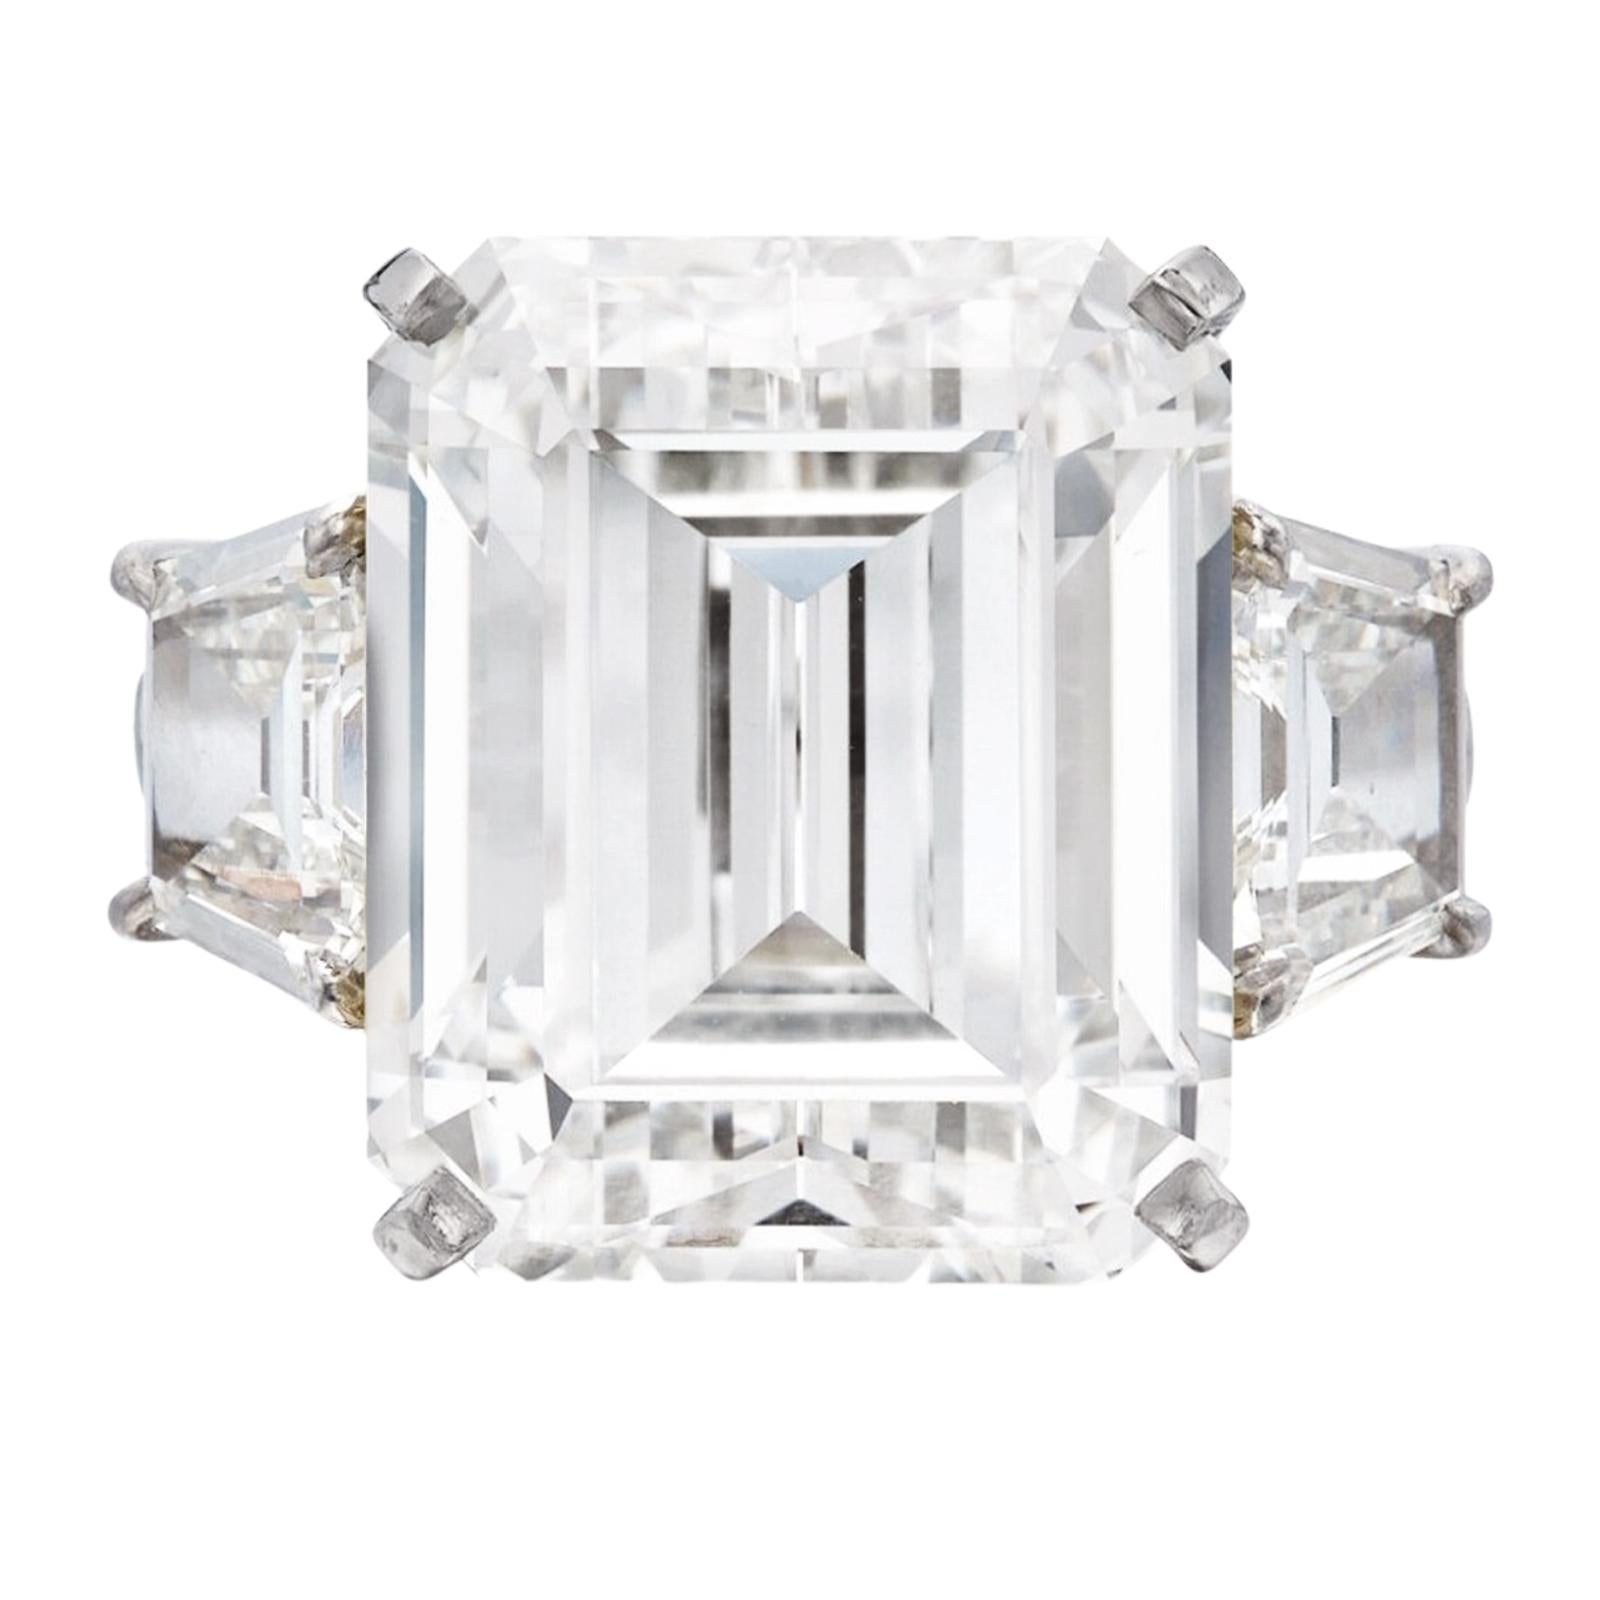 The 5.00 carat E color VS emerald diamond ring in 18K white gold, adorned with trapezoid baguettes, is an exquisite and opulent piece of jewelry. At the center of this ring gleams a captivating emerald-cut diamond weighing an impressive 5.00 carats.